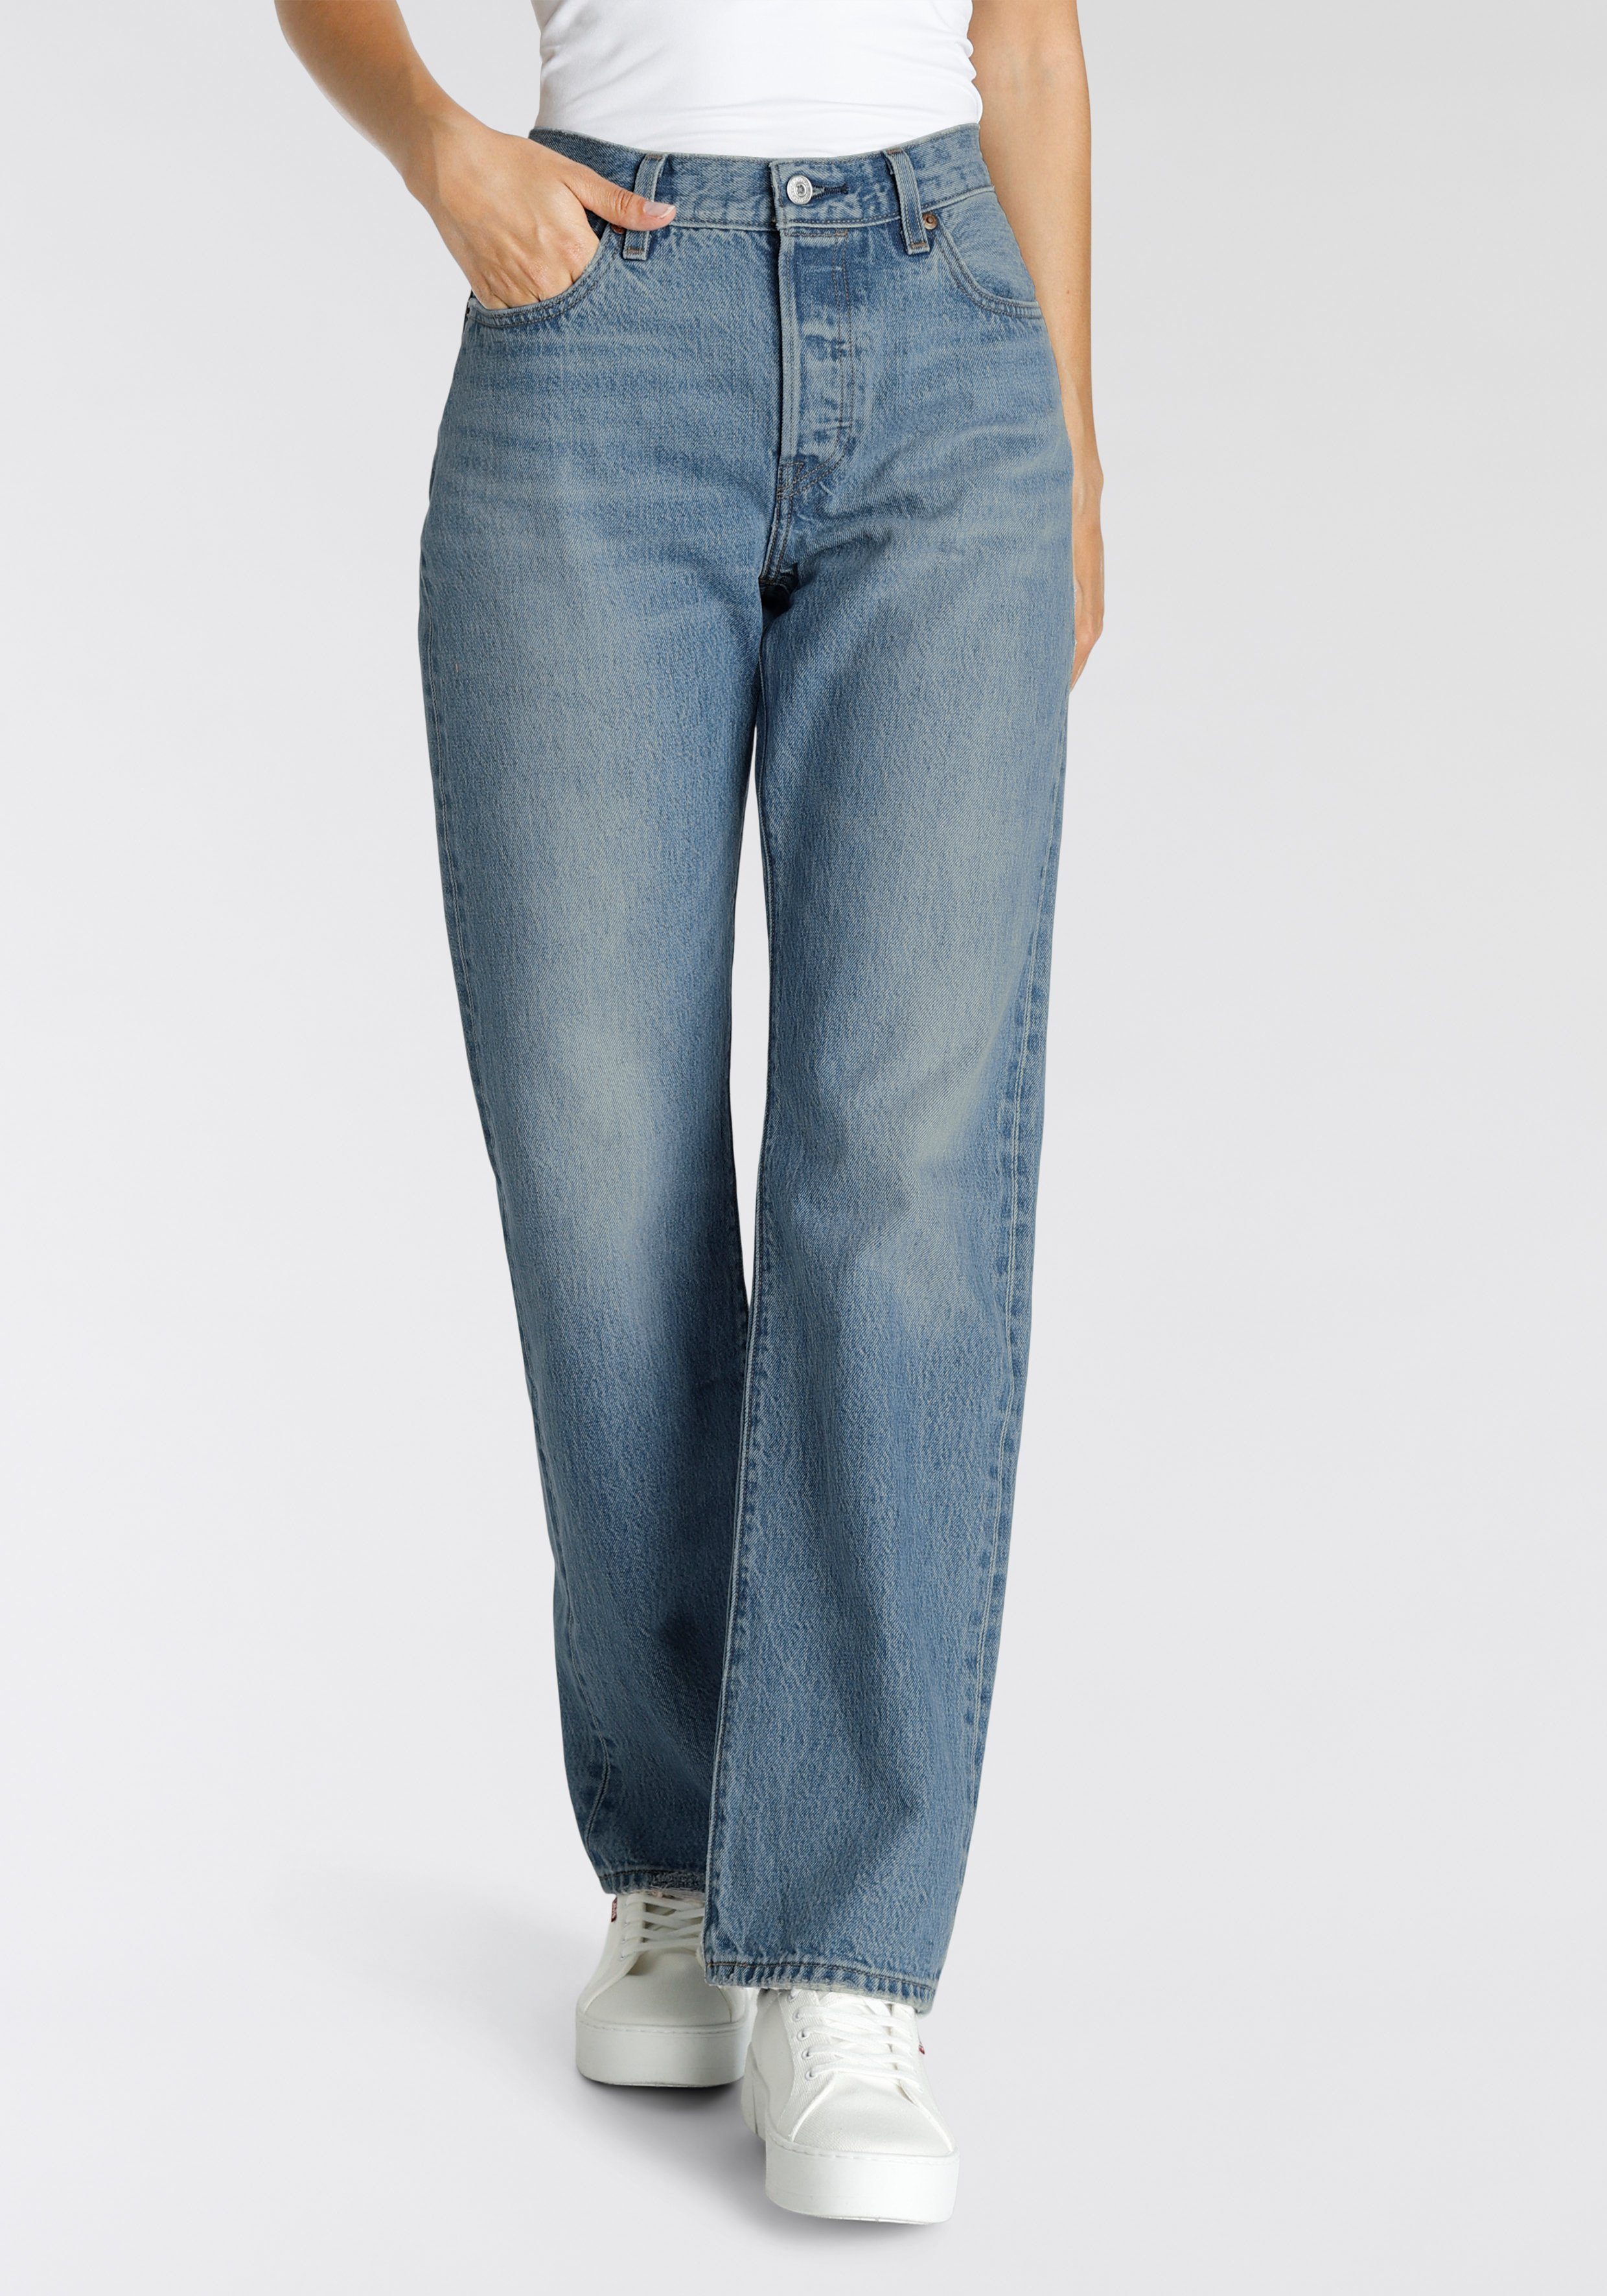 Levi's® Weite Jeans 90'S 501 501 Collection shape shifter